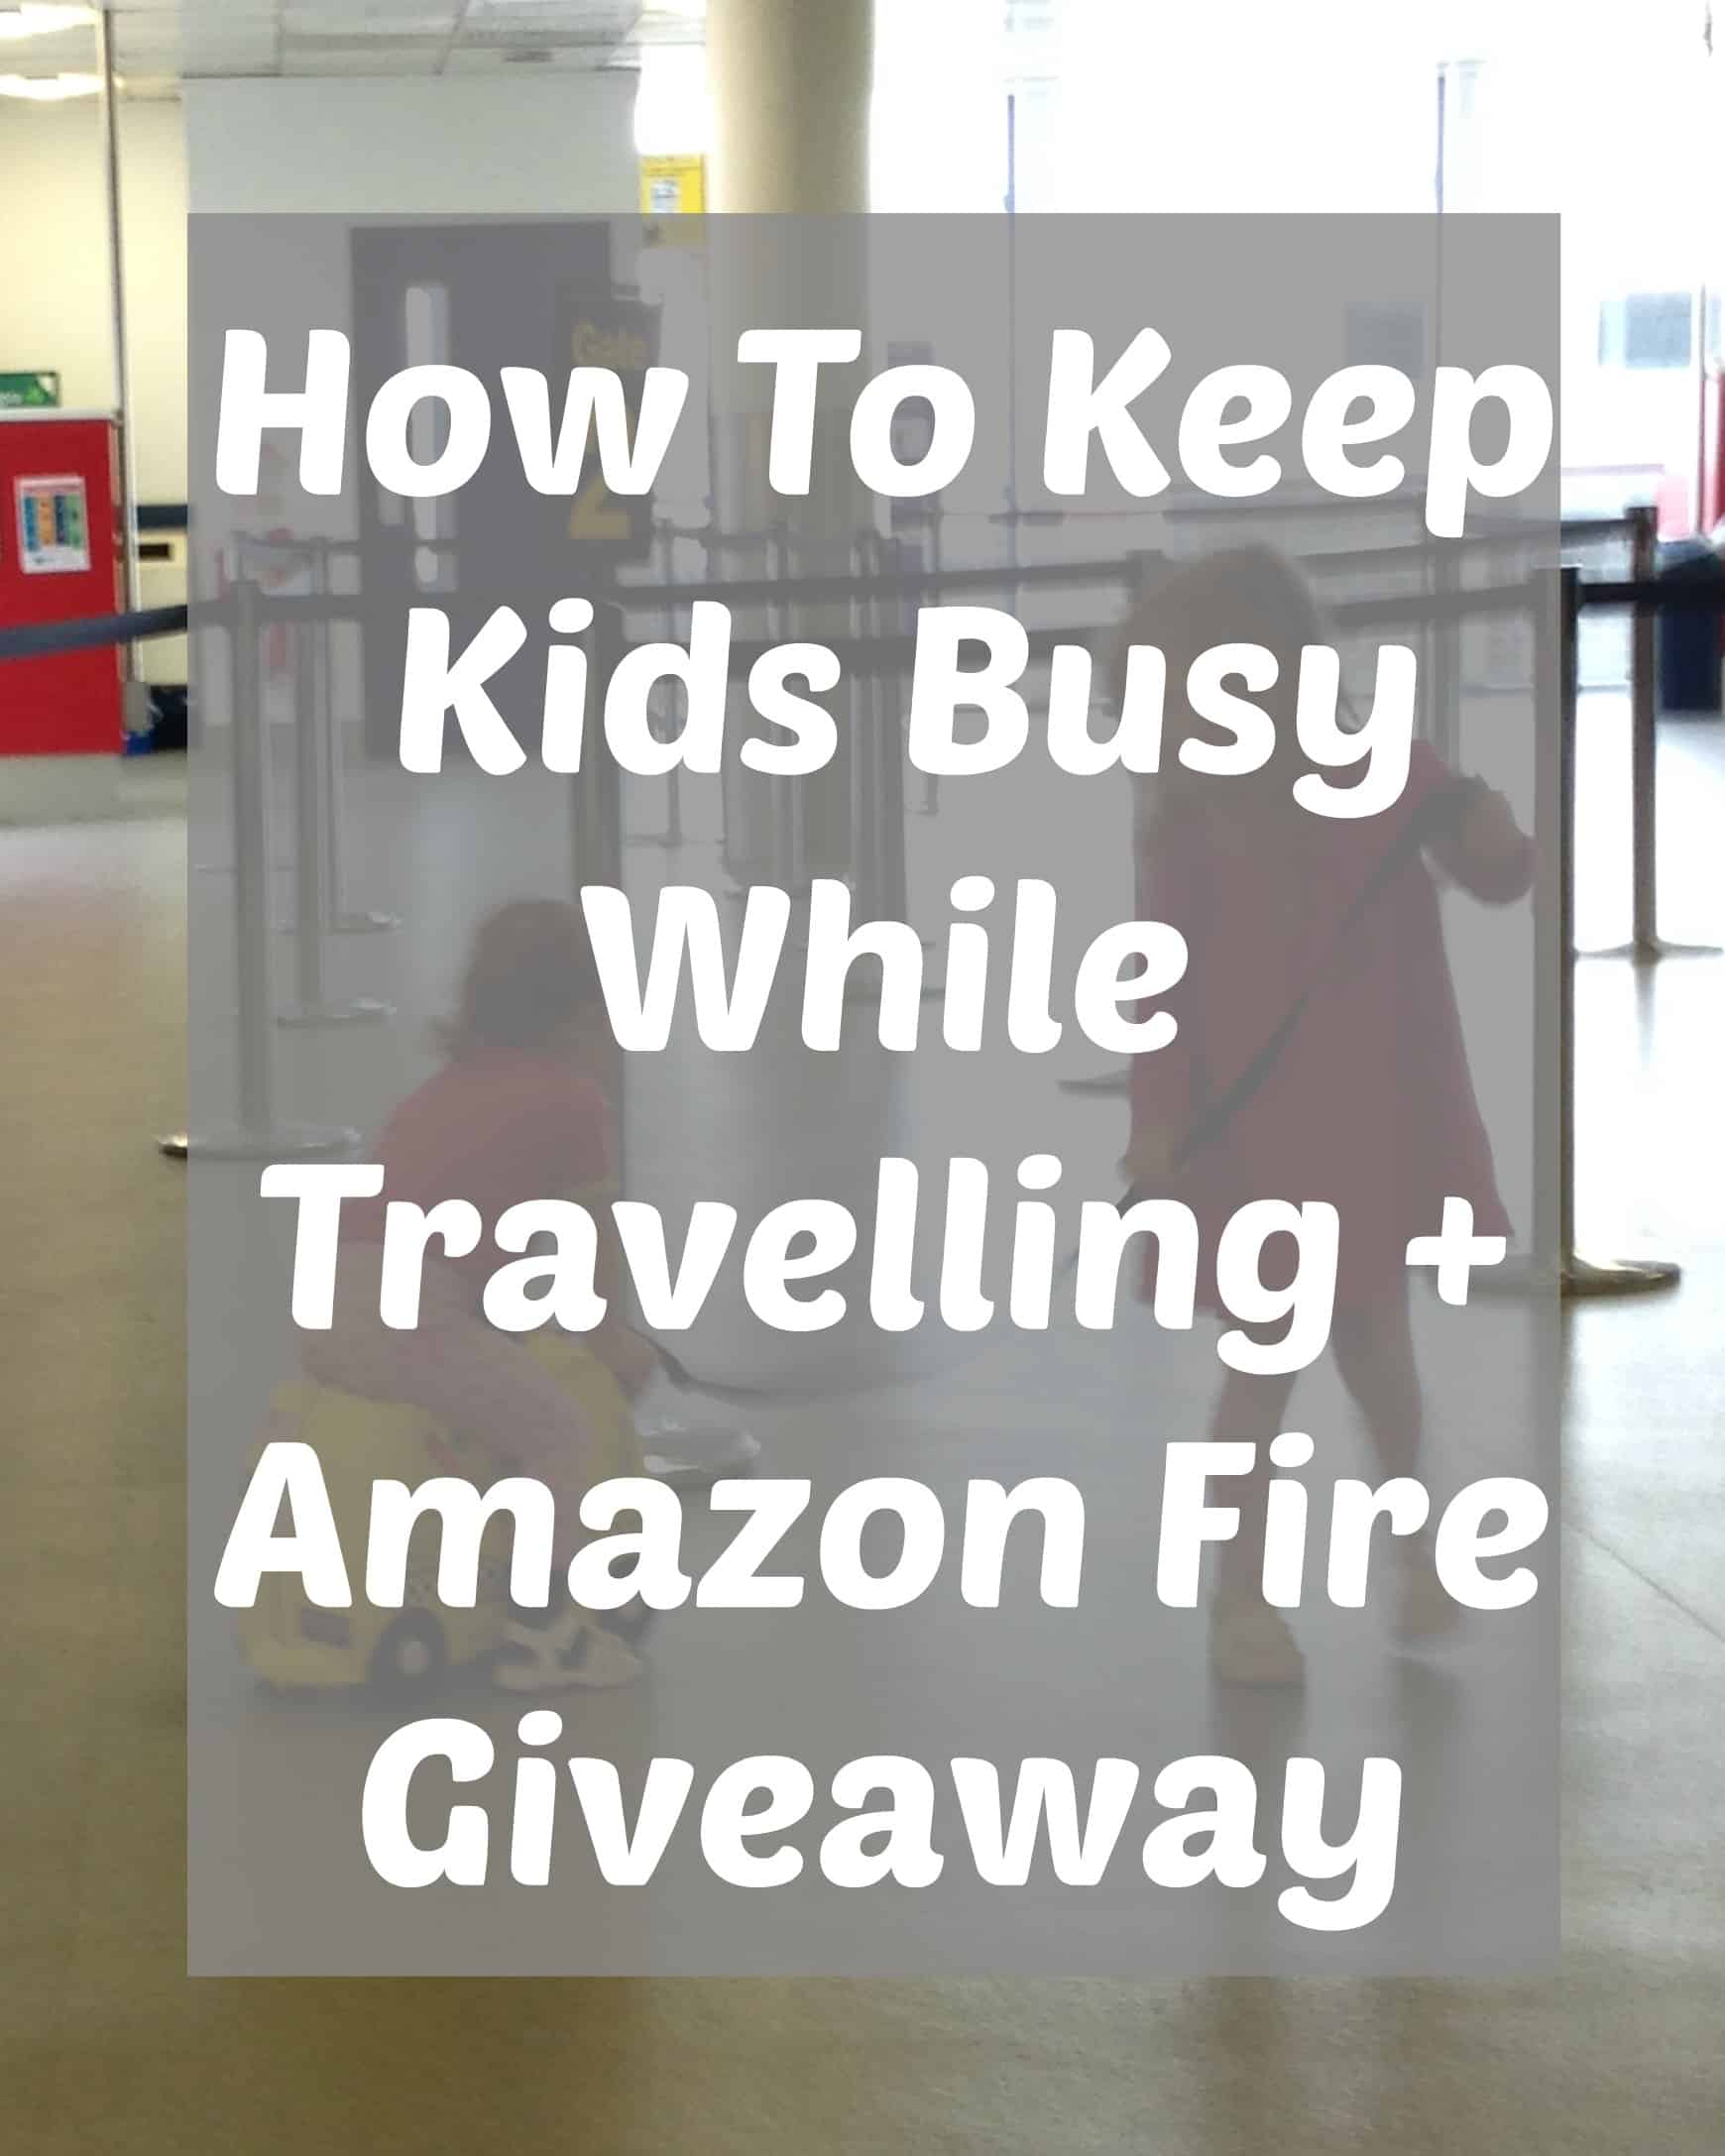 How To Keep Kids Busy While Travelling + Amazon Fire Giveaway